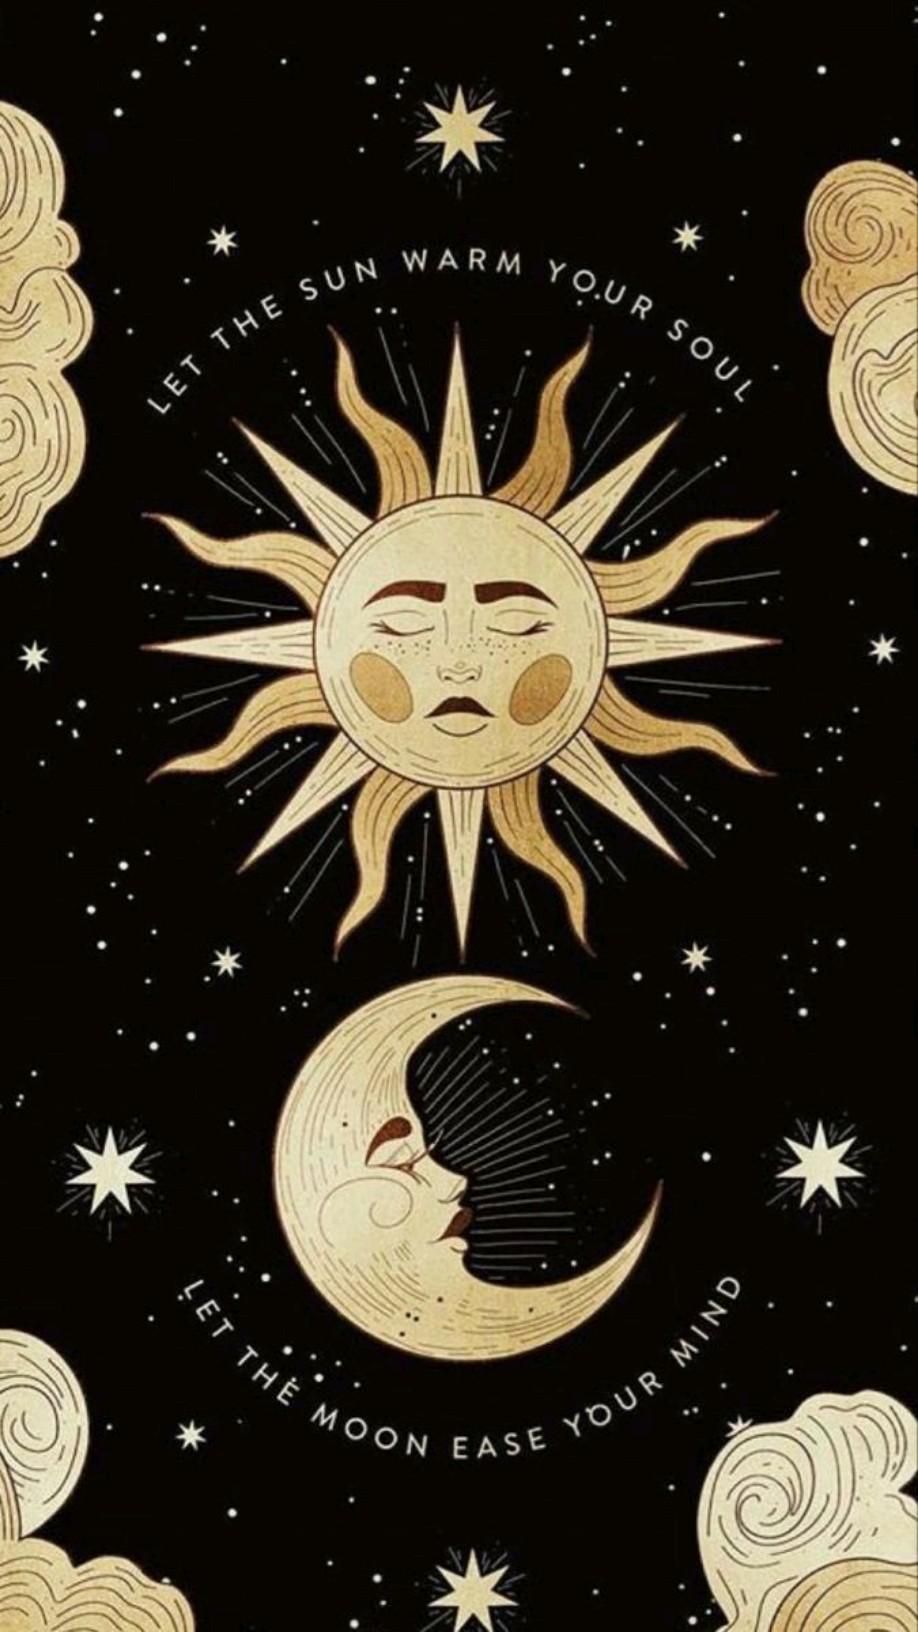 IPhone wallpaper of the sun and moon with a quote. - Spiritual